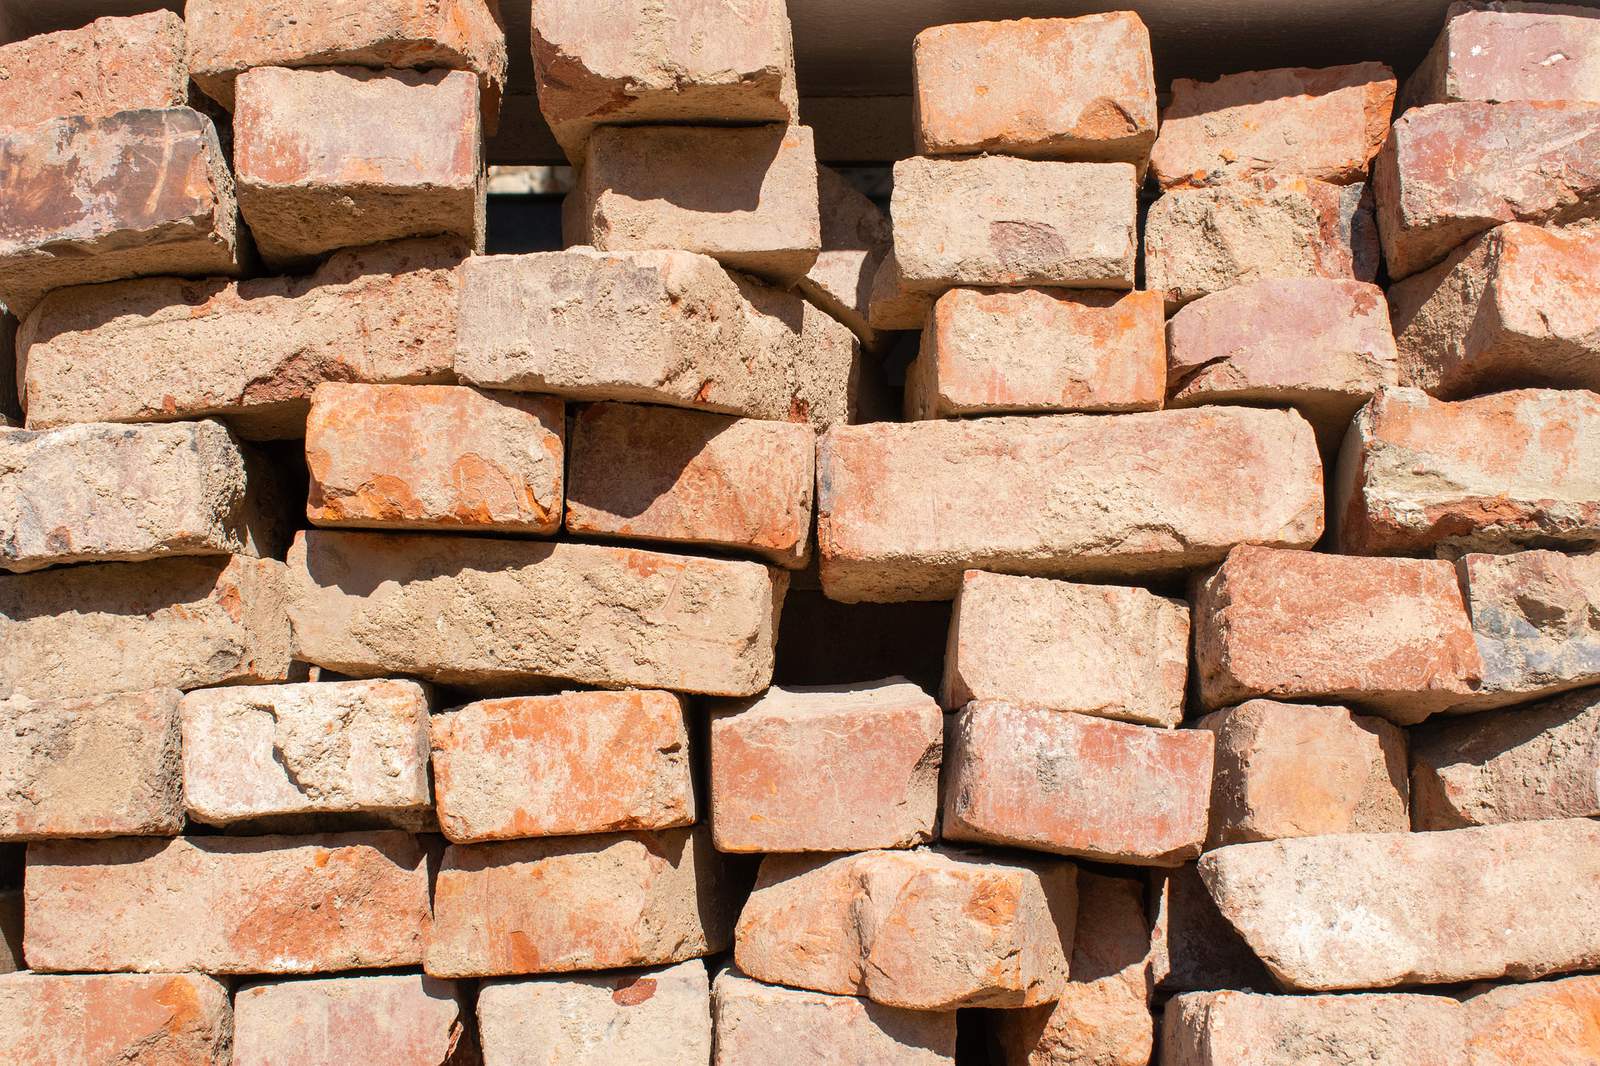 Ask 2: Why are loads of bricks being delivered around Texas?